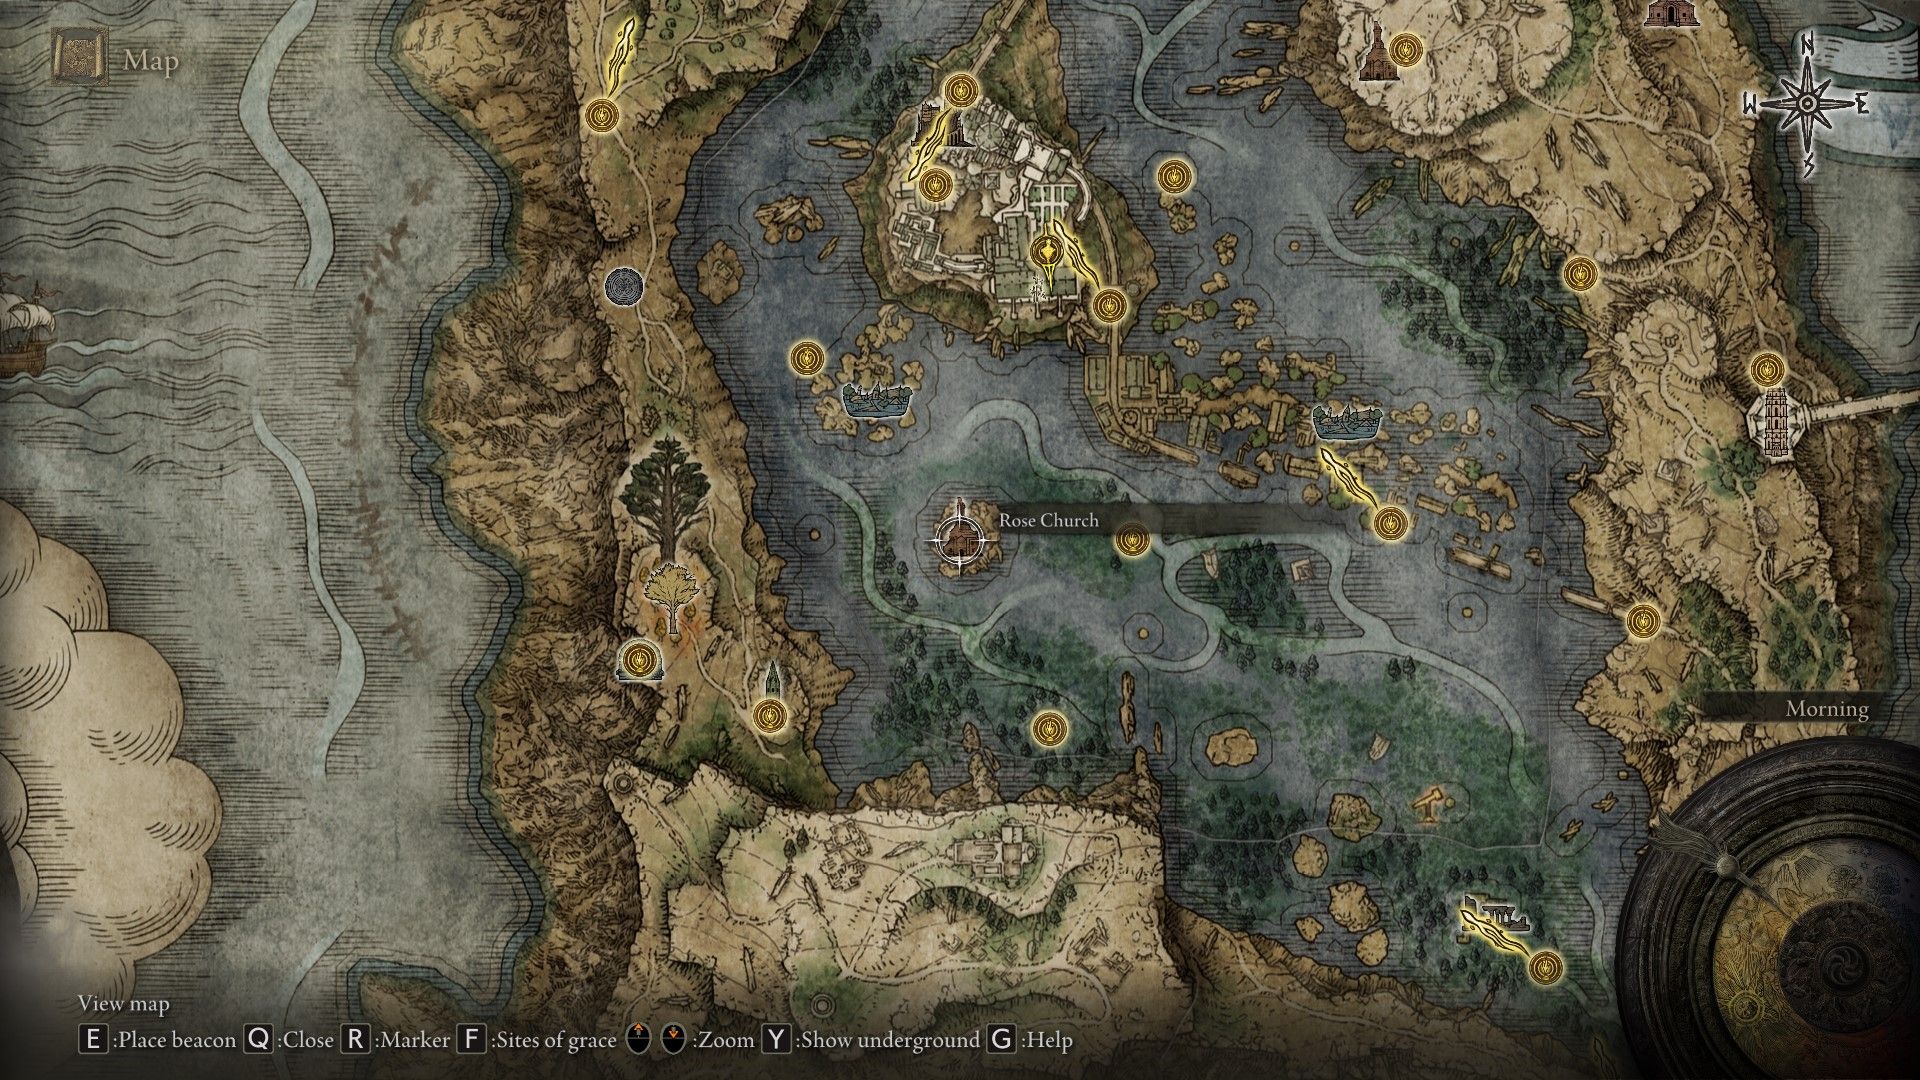 How to get to Rose Church and Find White Faced Varre in Elden Ring